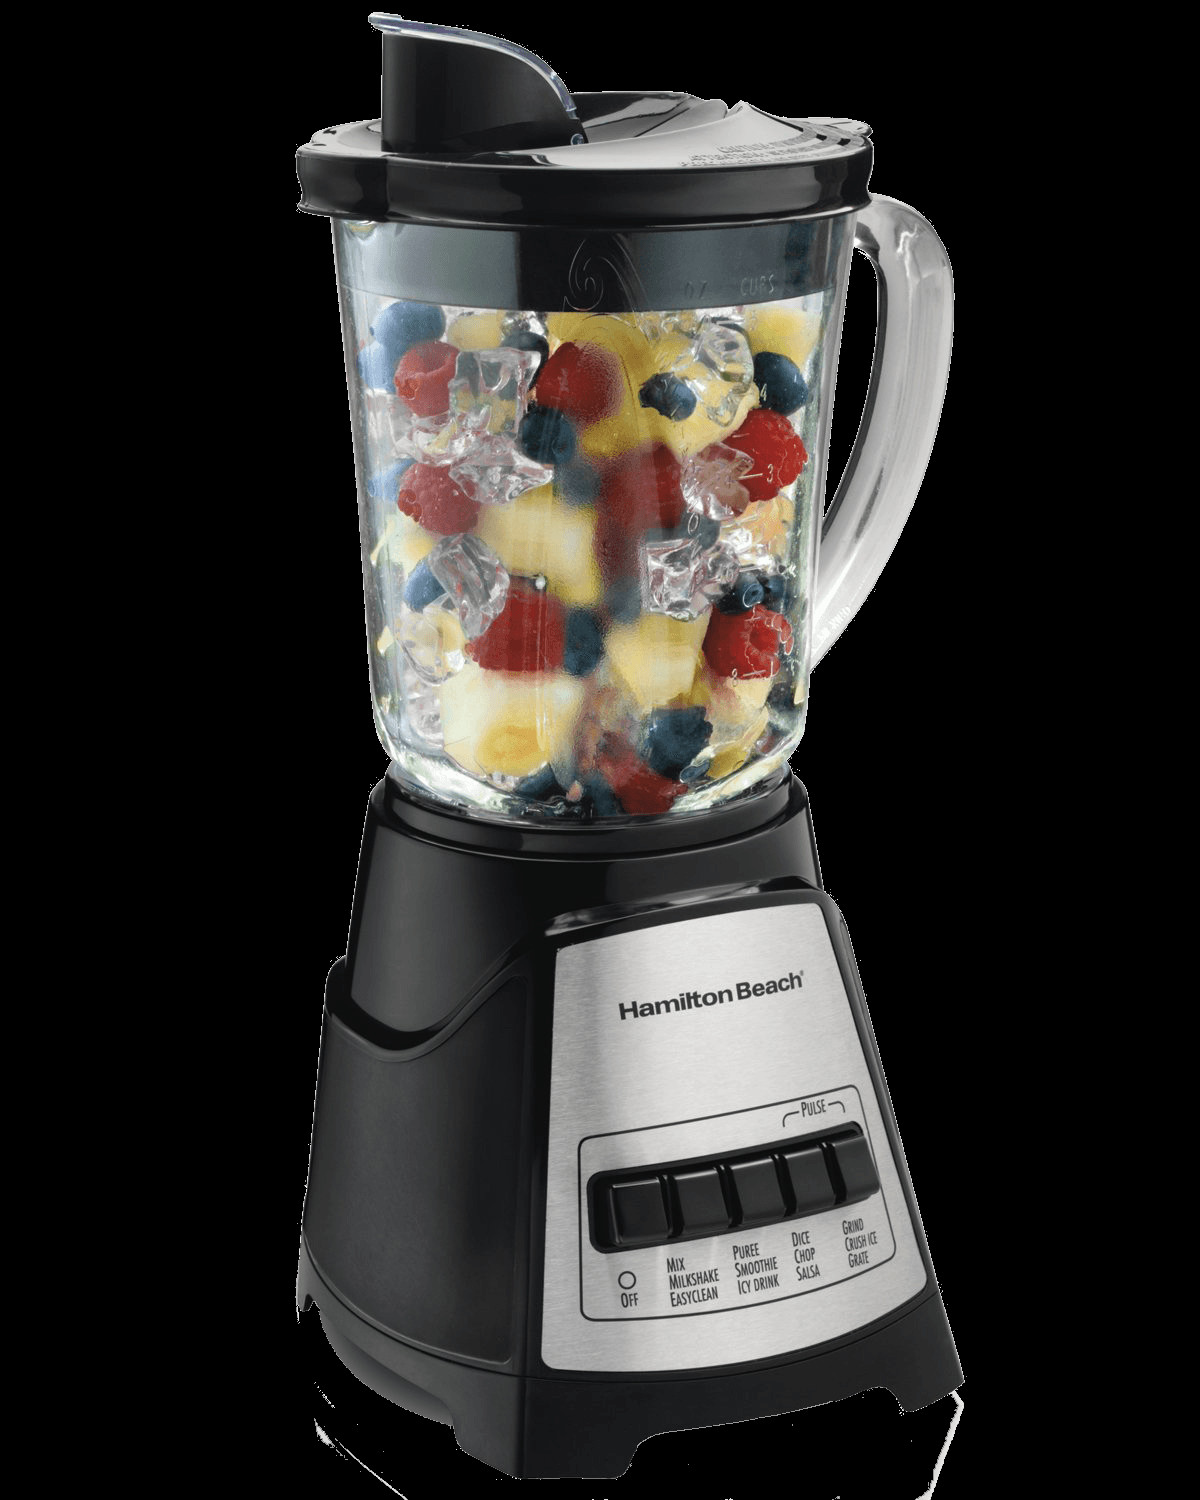 Blender For Smoothies
 How to Buy the Best Blender for Smoothies